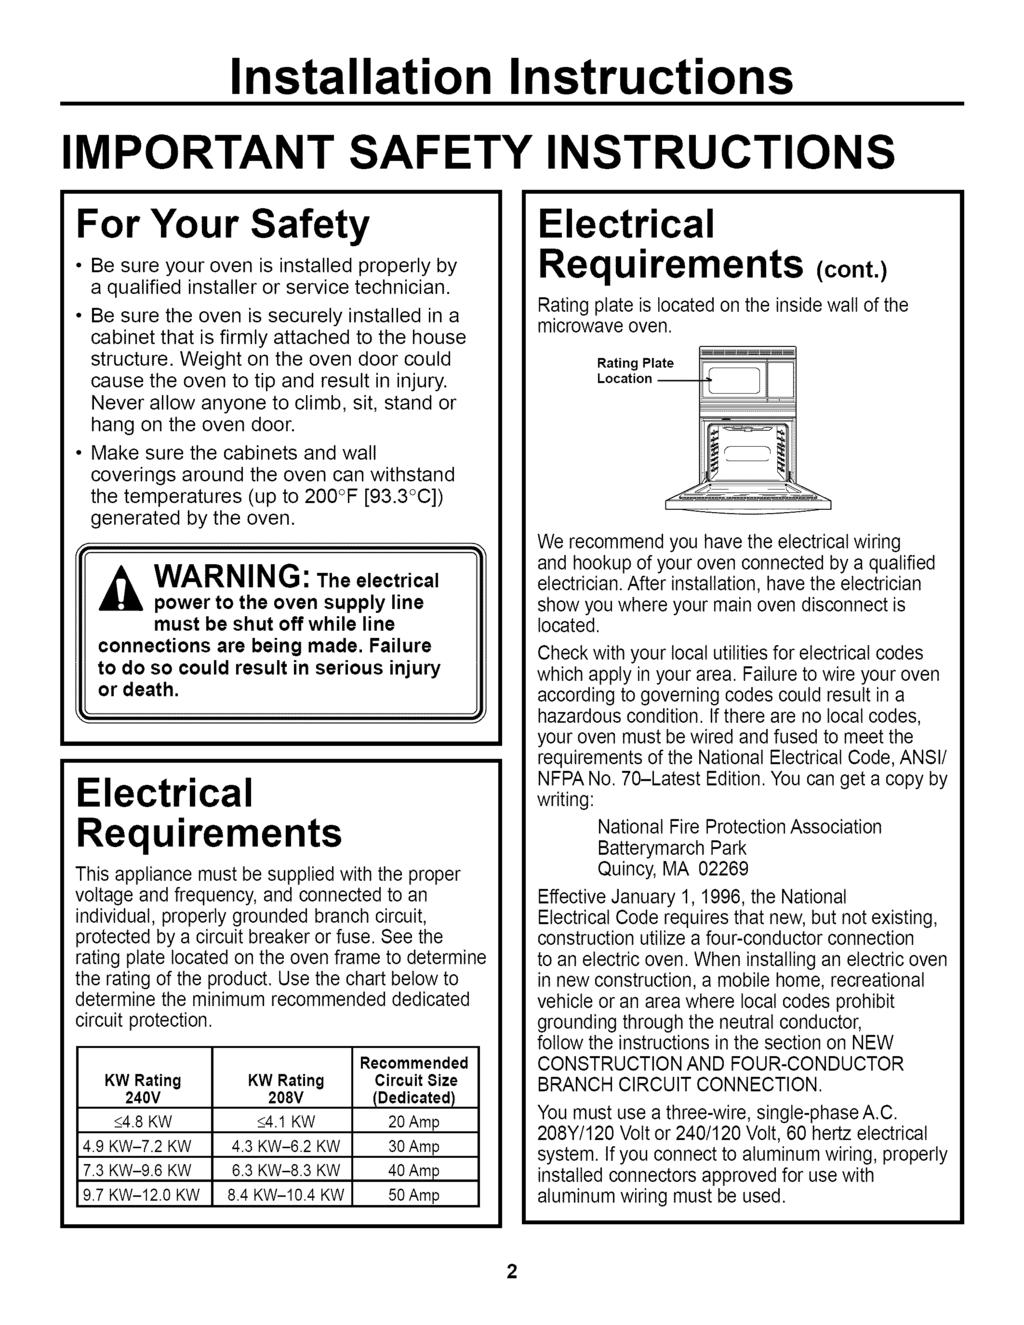 IMPORTANT SAFETY INSTRUCTIONS For Your Safety Be sure your oven is installed properly by a qualified installer or service technician.